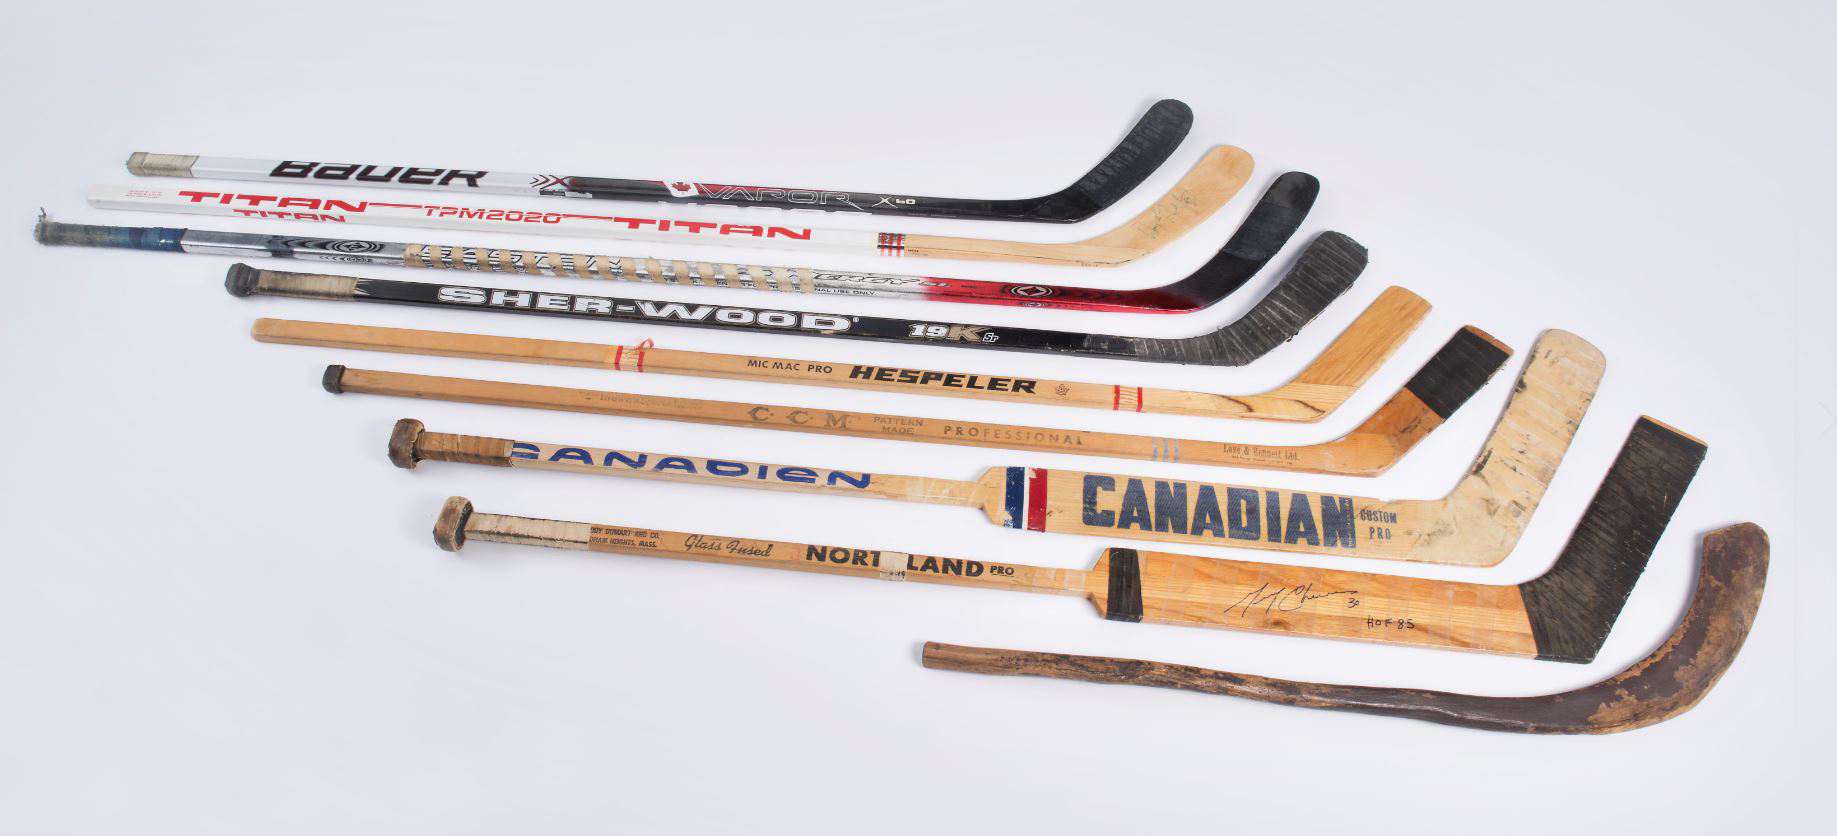 A variety of hockey sticks used throughout modern history